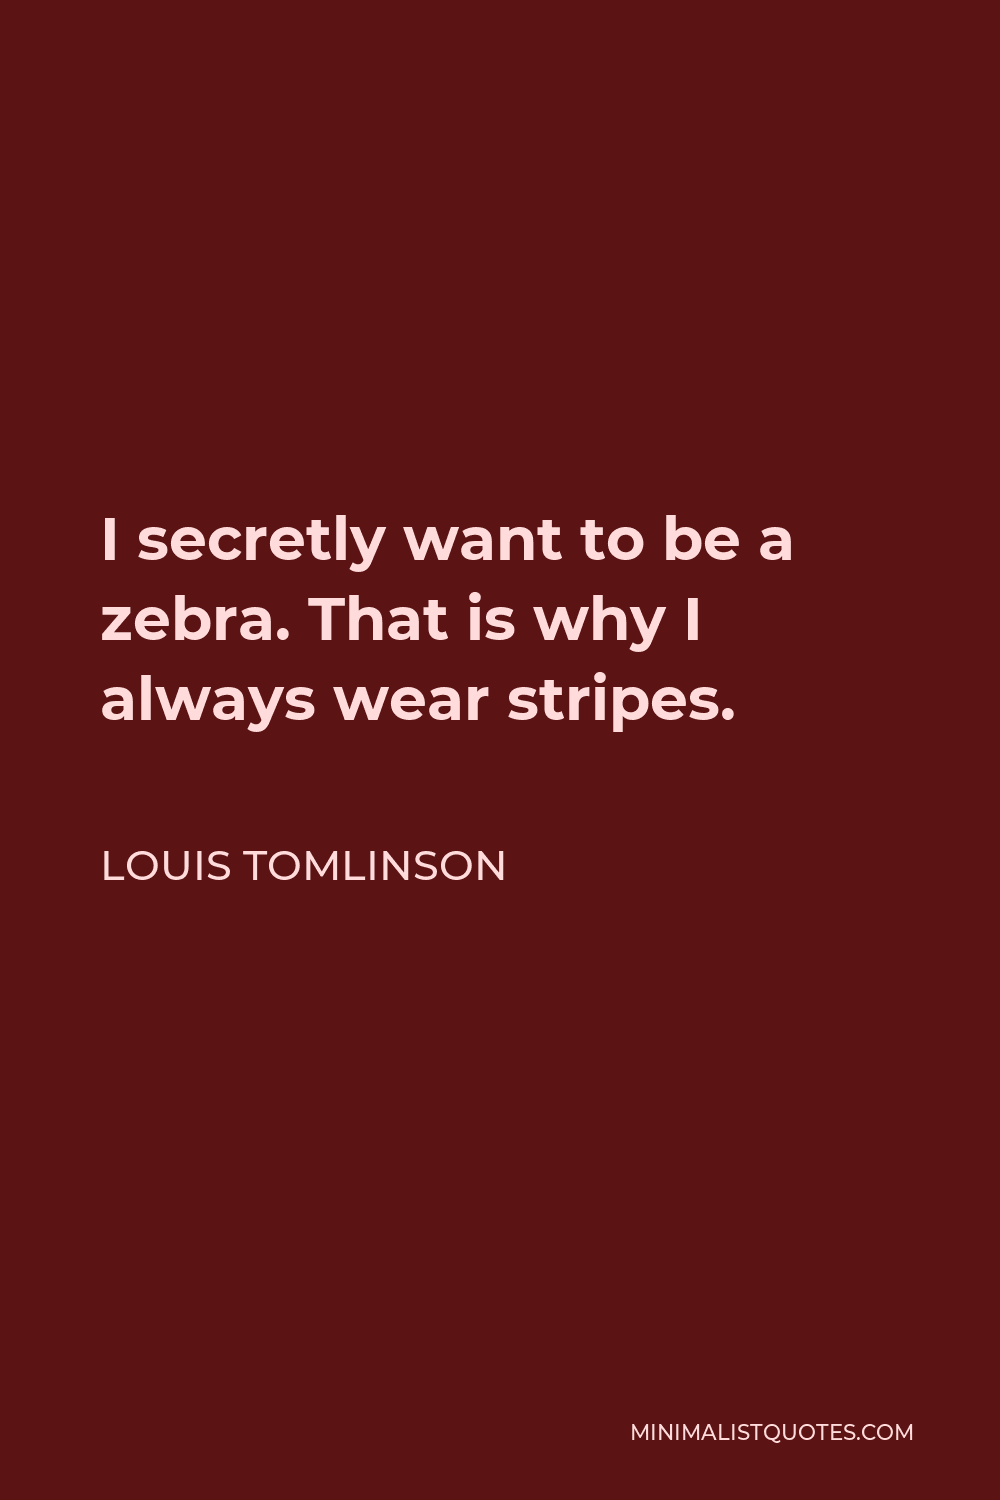 Louis Tomlinson Quote - I secretly want to be a zebra. That is why I always wear stripes.